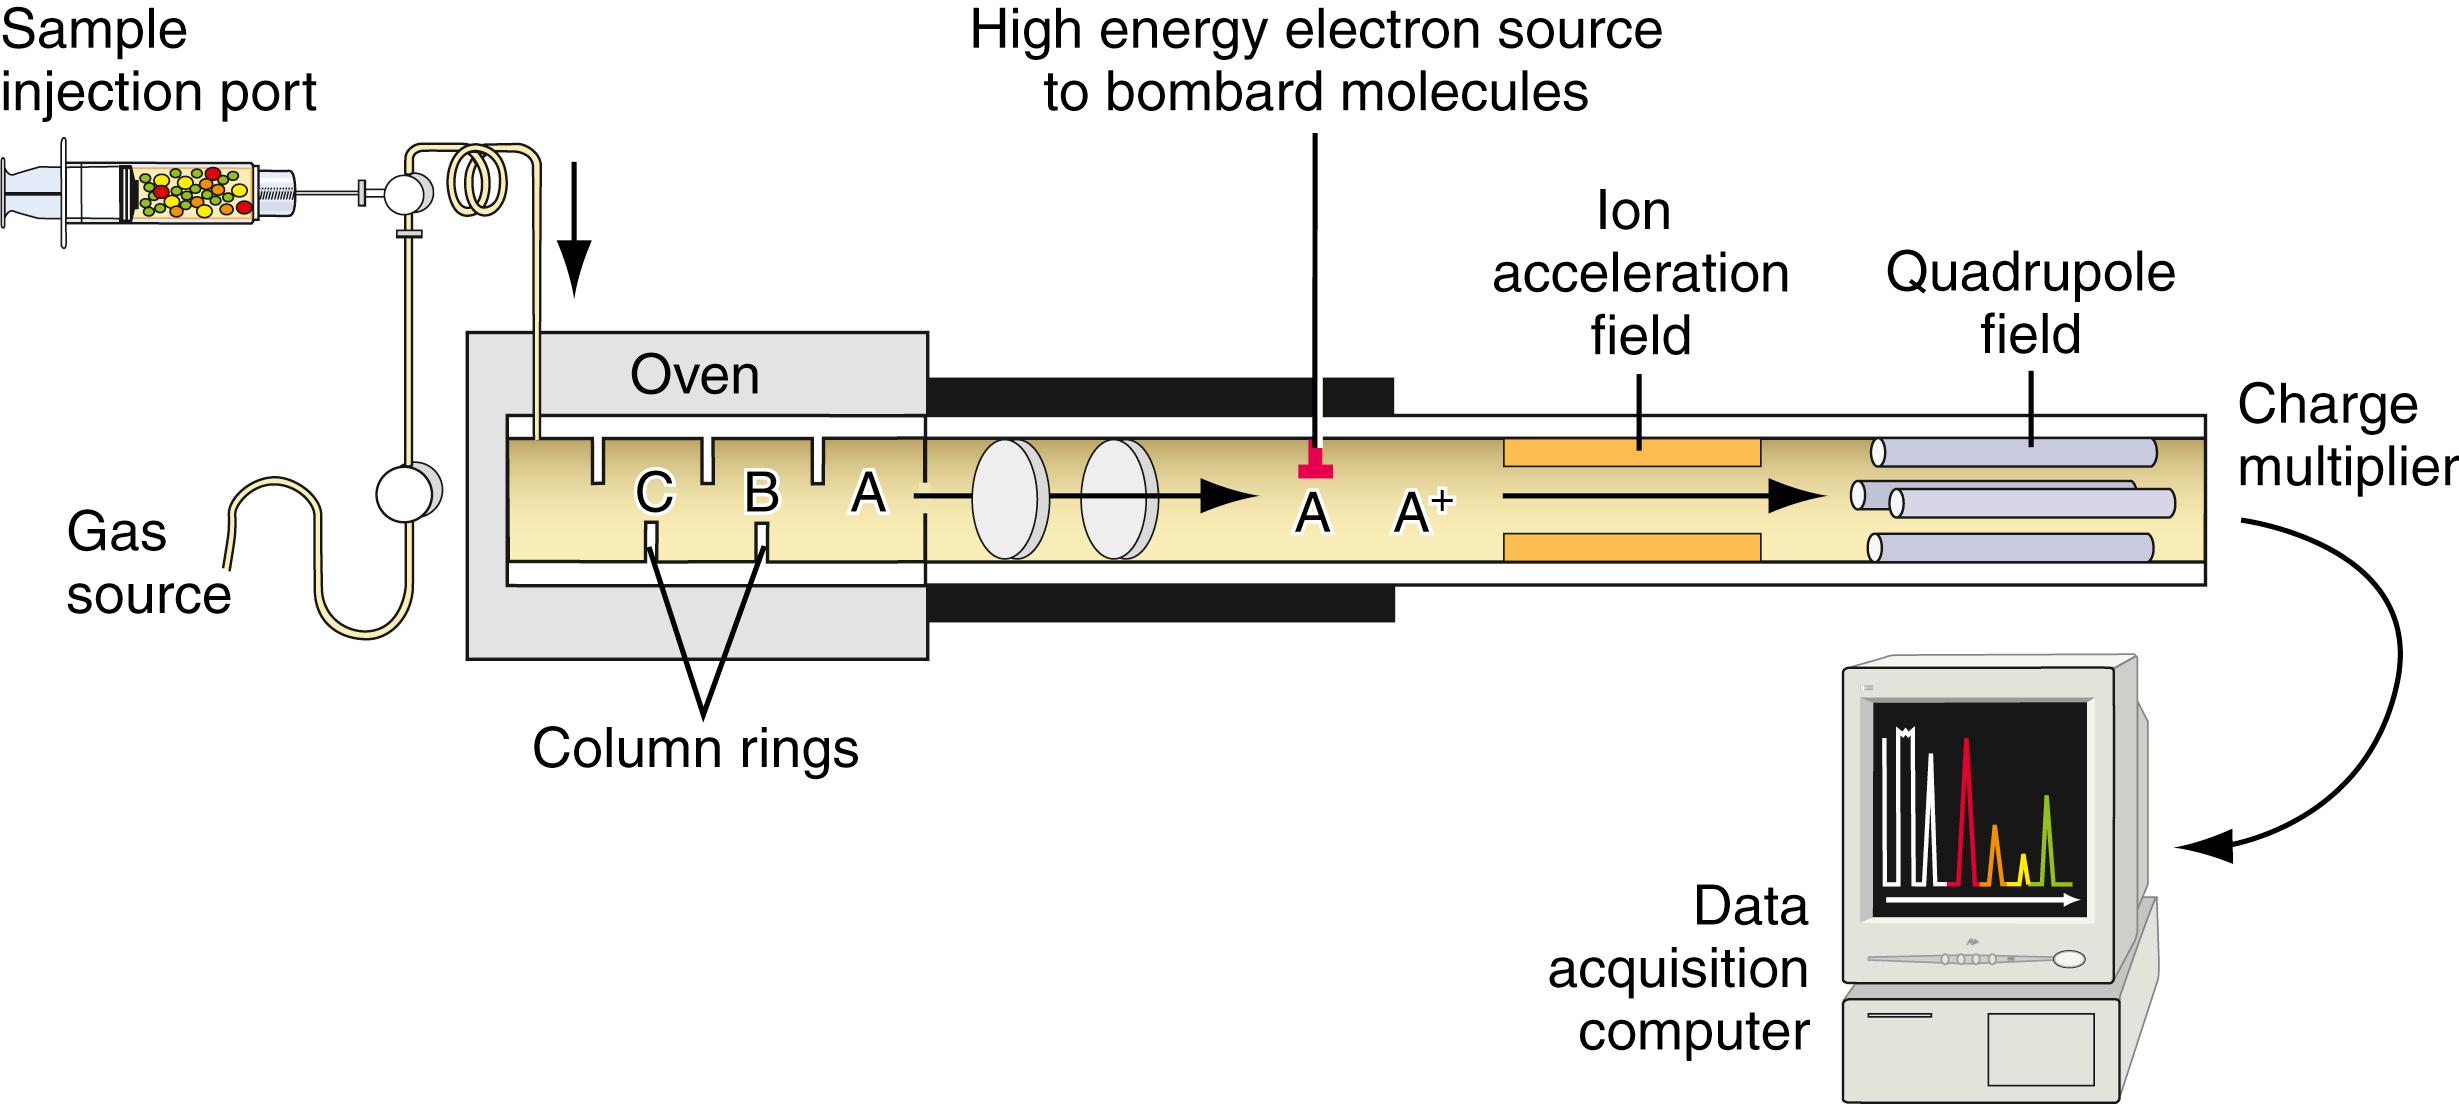 Figure 24.5, A schematic view of the components of gas chromatography–mass spectroscopy instrumentation. On the left of the figure is the gas chromatographic system, in which a volatilized compound is moved by an inert gas over a column consisting of rings coated with a liquid. Compounds C, B, and A separate on this column and are maintained in the gas phase by the oven that surrounds the column. The separated compounds then enter the mass spectrometer on the right side of the figure, where they are subjected to bombardment by electrons, resulting in molecule ion species. These ionic species then are accelerated in a field and are passed through an electric quadrupole field. Only those ions with a narrow range of mass/charge ratios (m/e ratios) will pass through the tuned field so that they strike the detector. The electric currents that result are digitalized and stored in a computer that analyzes the data ( Davis et al., 1989 ).